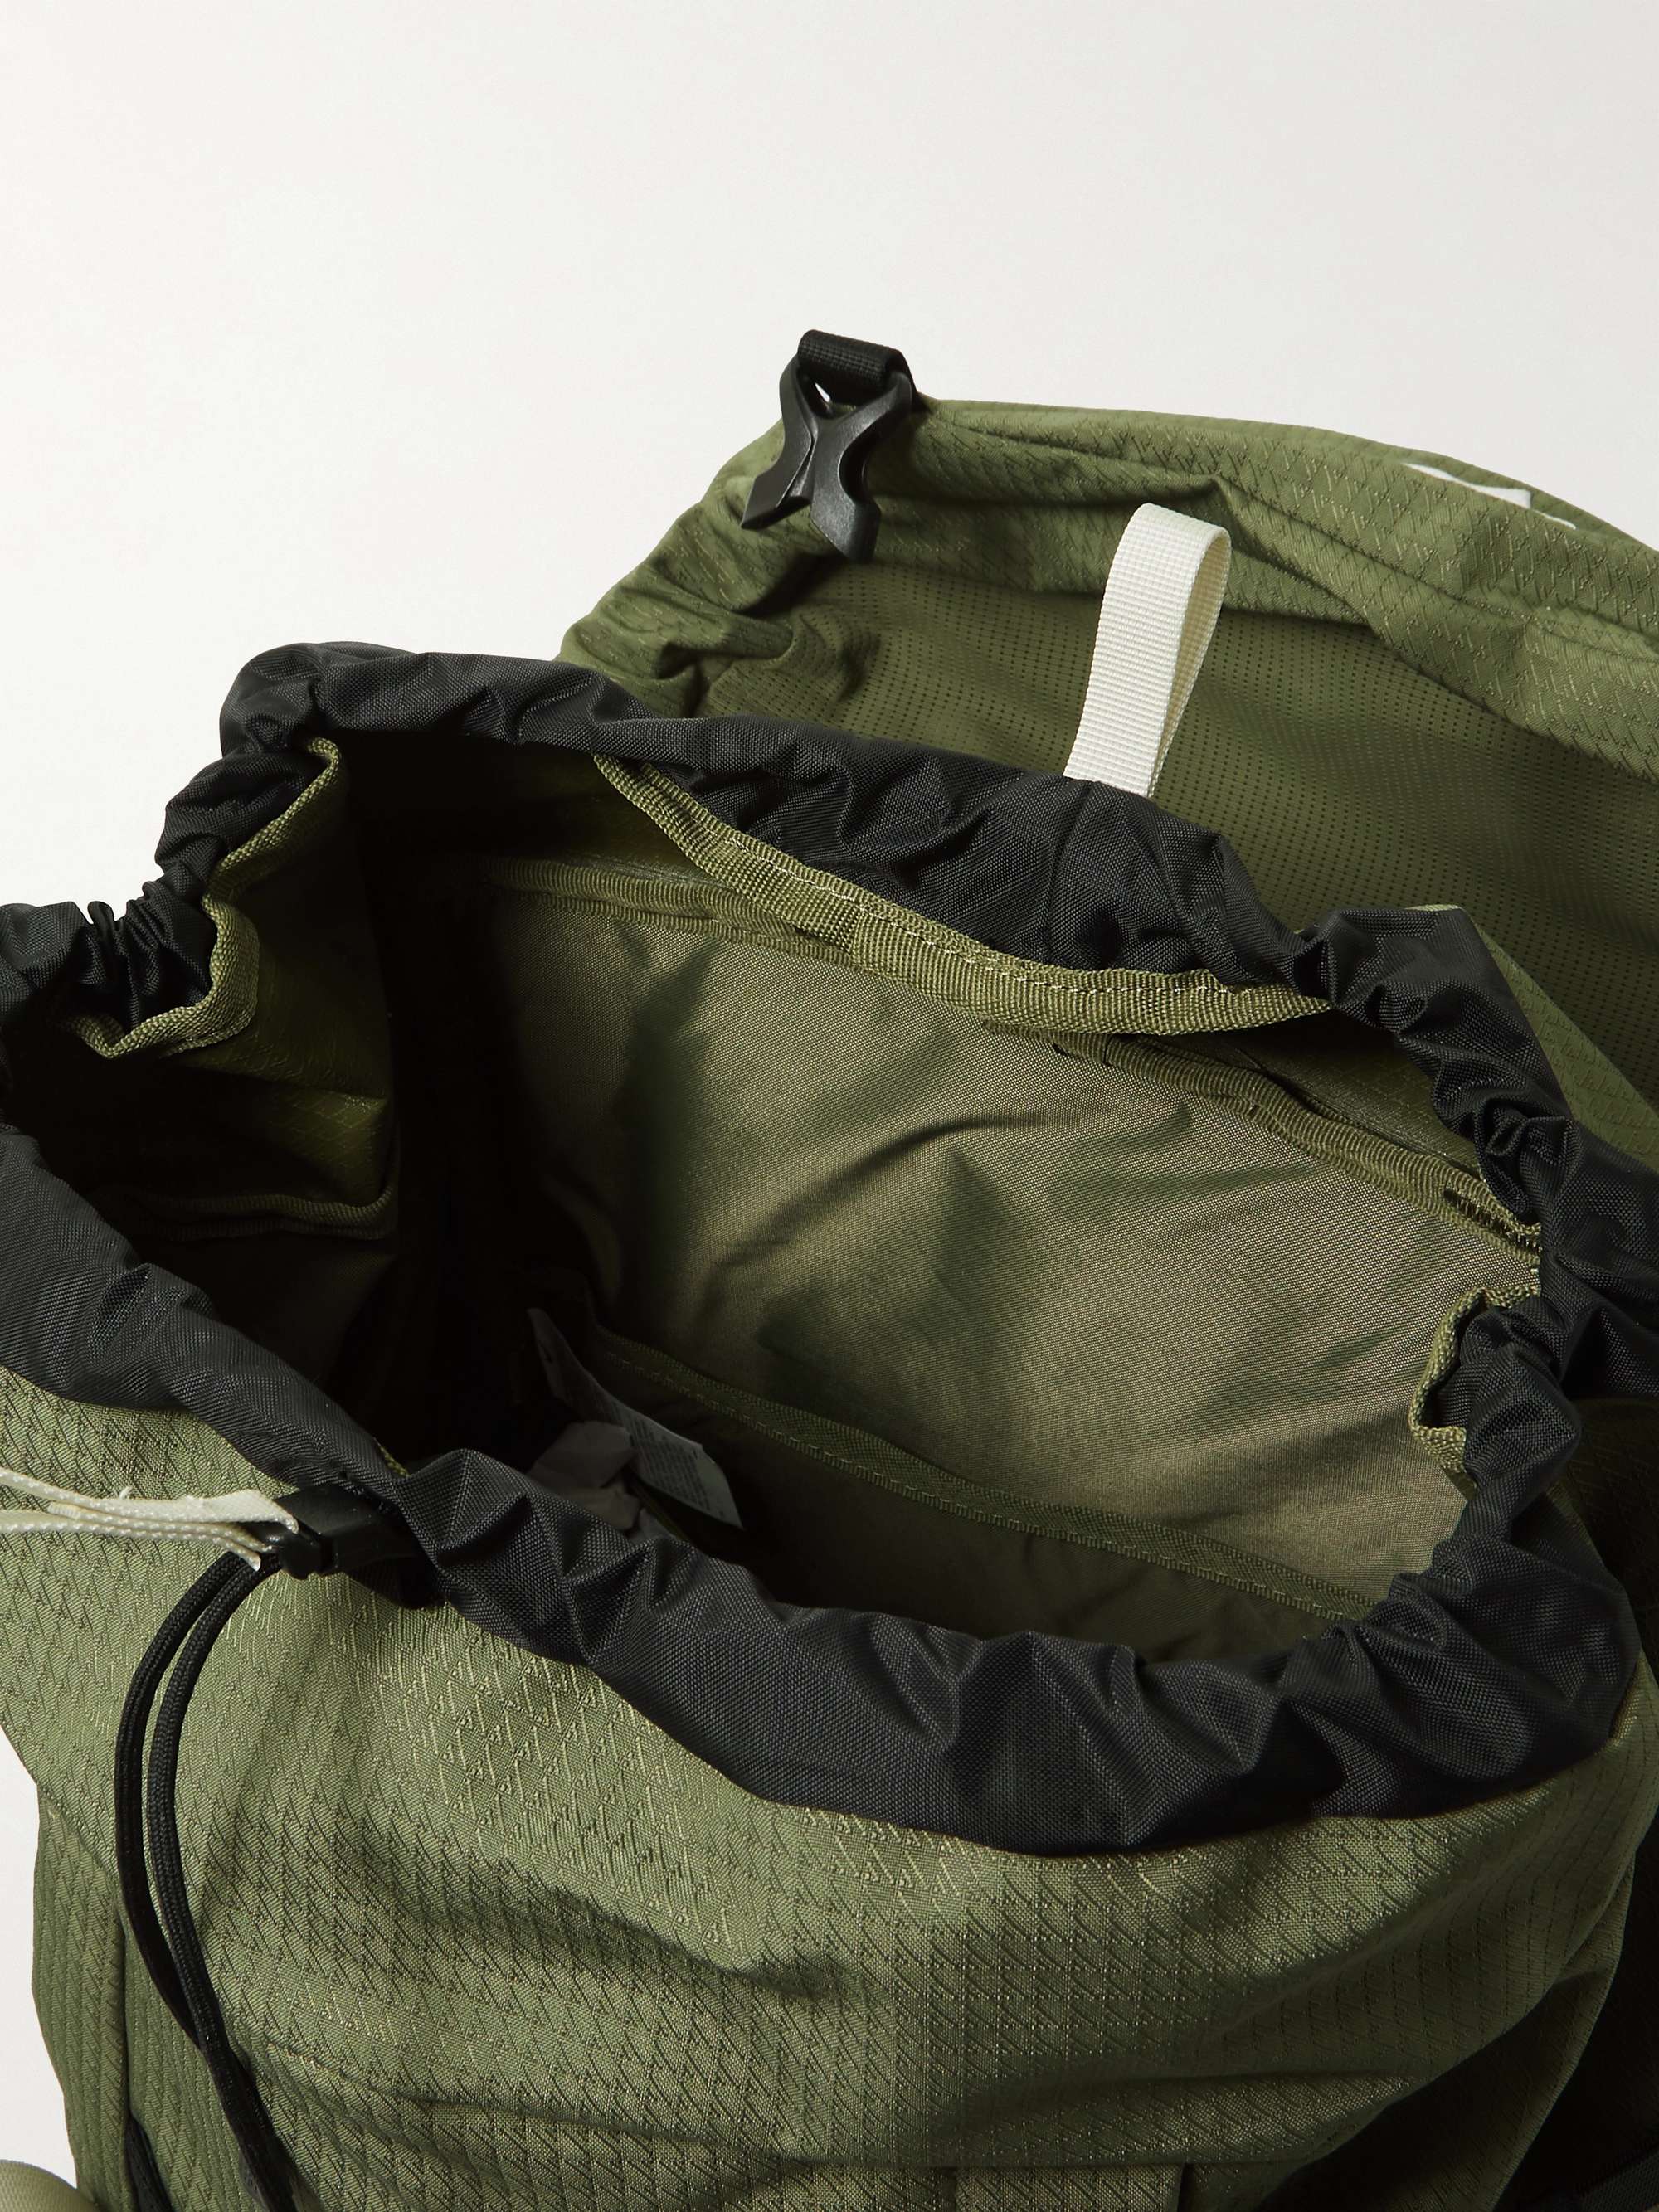 NIKE ACG 36 Webbing-Trimmed CORDURA and Ripstop Backpack